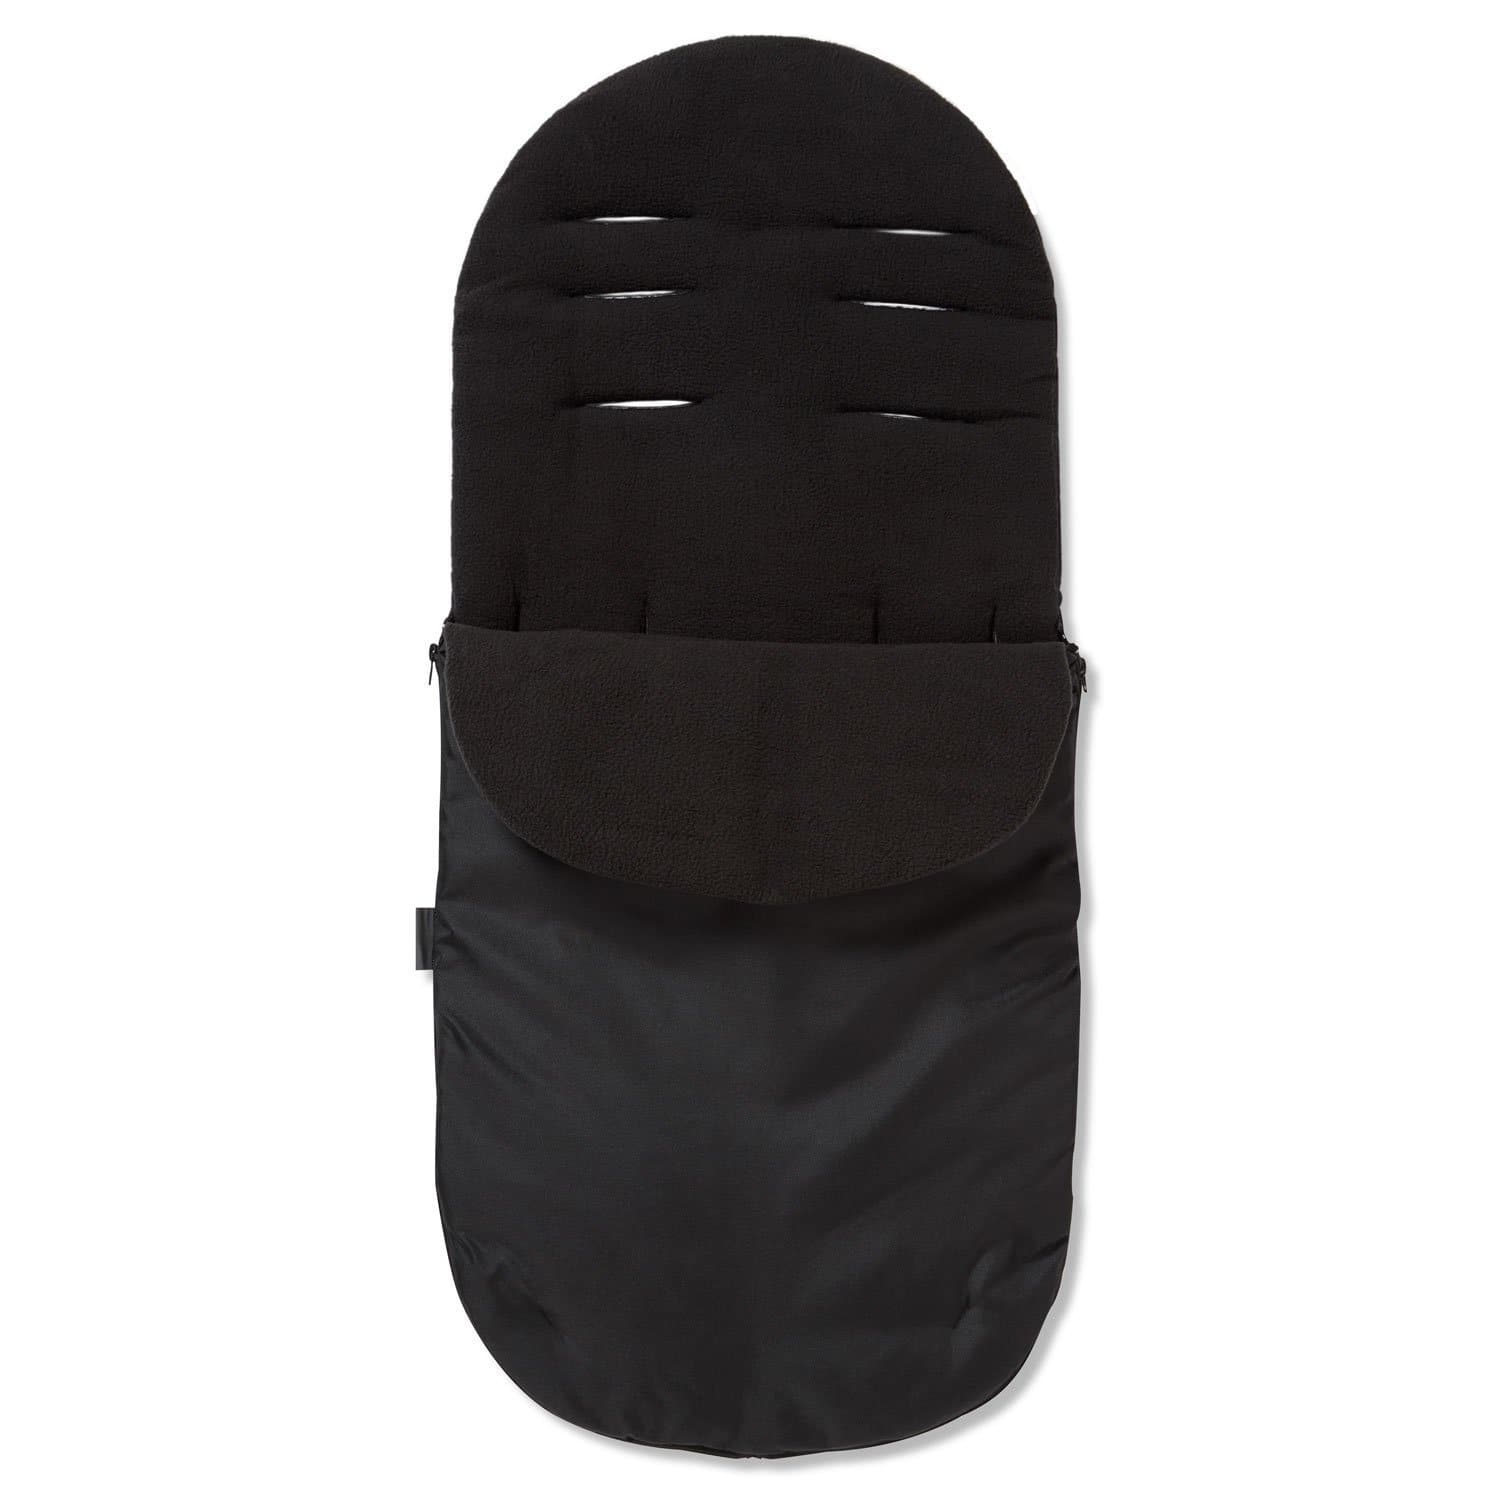 Footmuff / Cosy Toes Compatible with Mima - Black / Fits All Models | For Your Little One